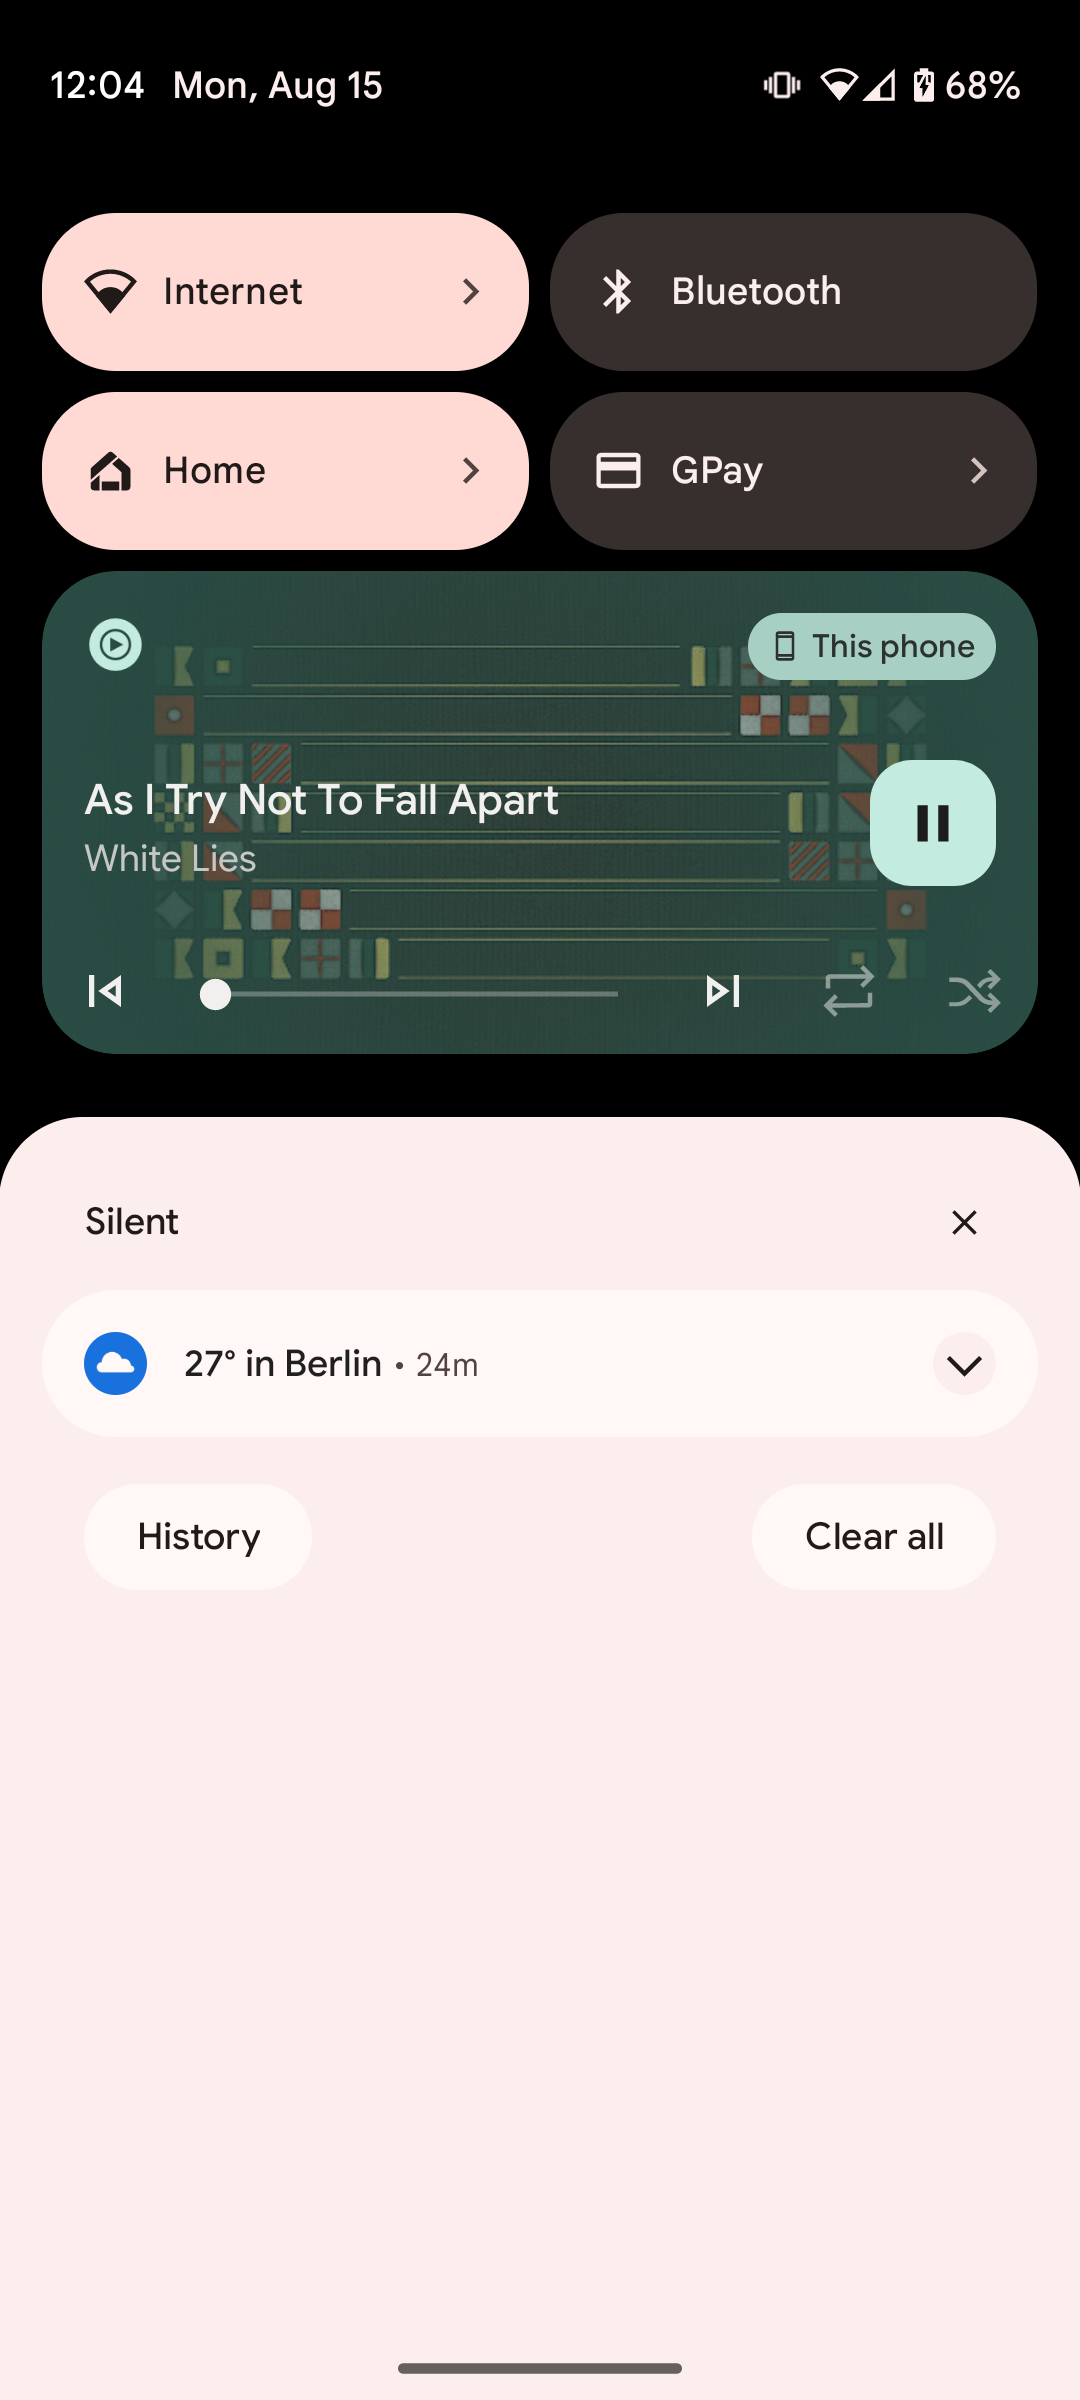 Android 13's notification shade with new media player